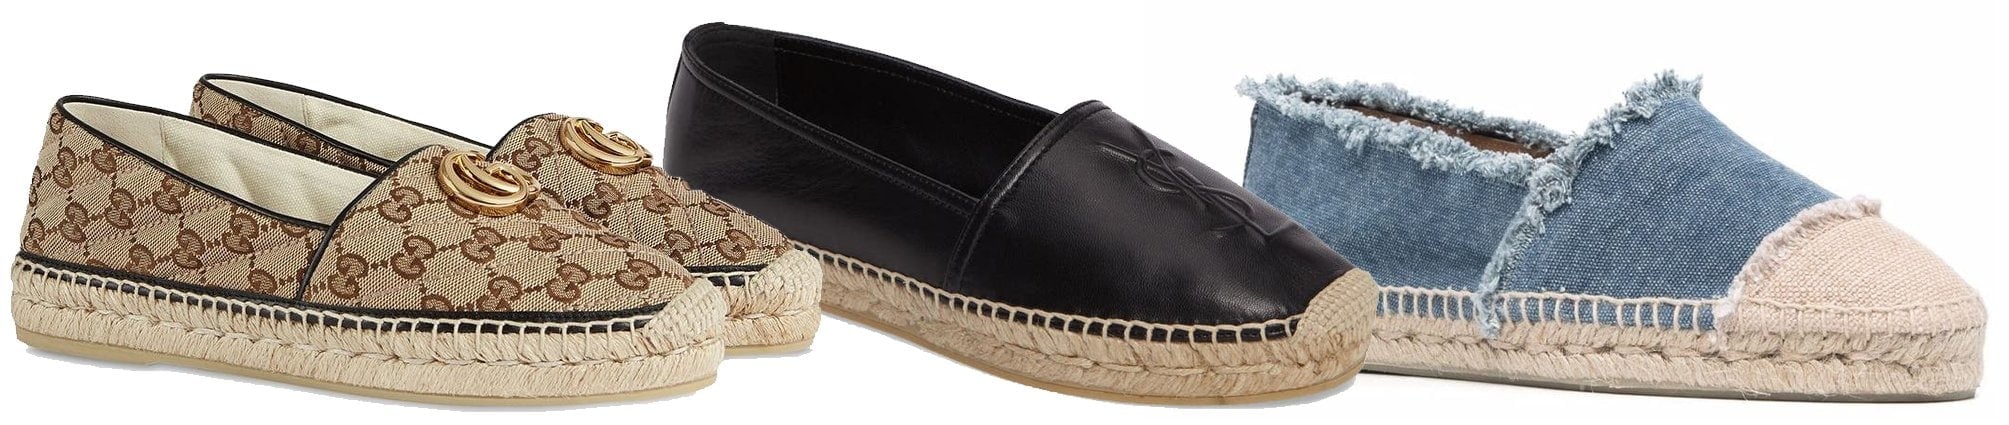 Espadrilles are a popular choice for slip-on shoes because they are comfortable, easy to wear, versatile, stylish, and breathable